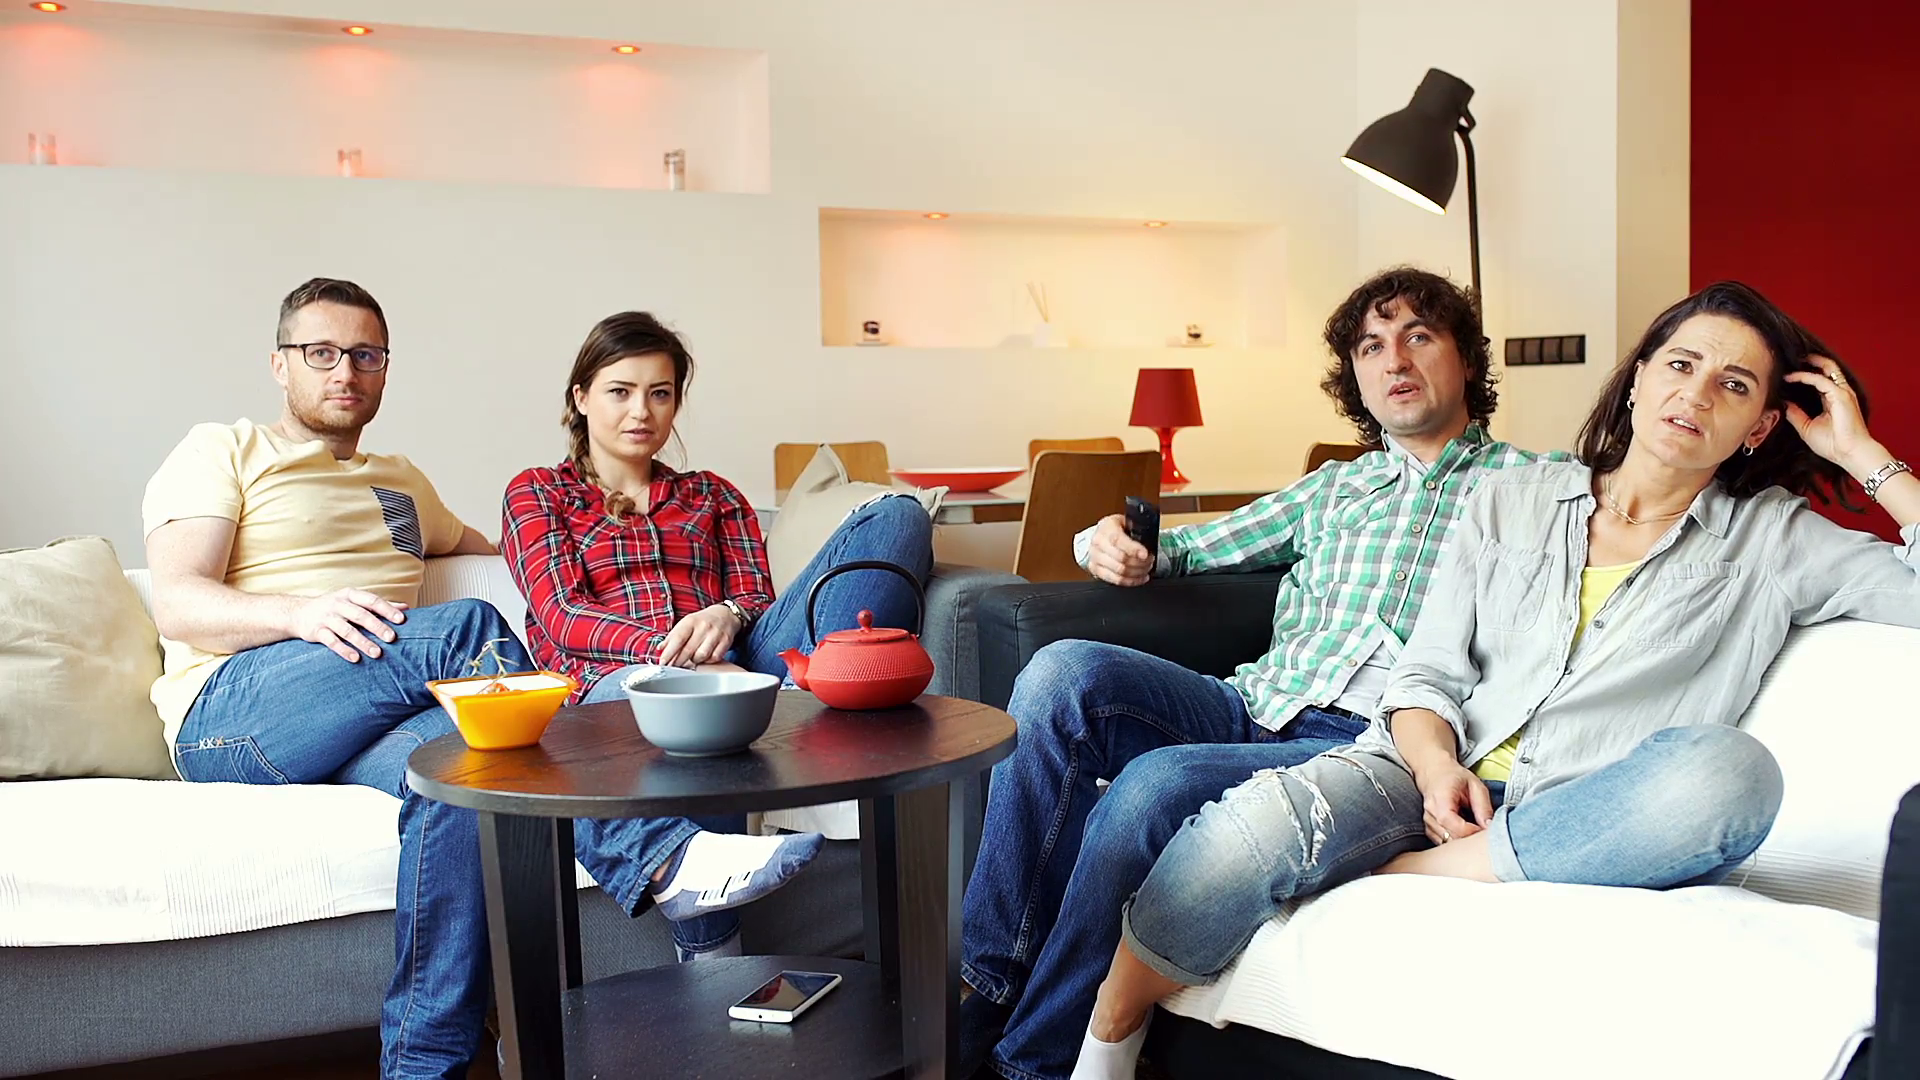 Simple Family. Family watching TV. Female friends watching TV together. Unhappy guy watching TV.